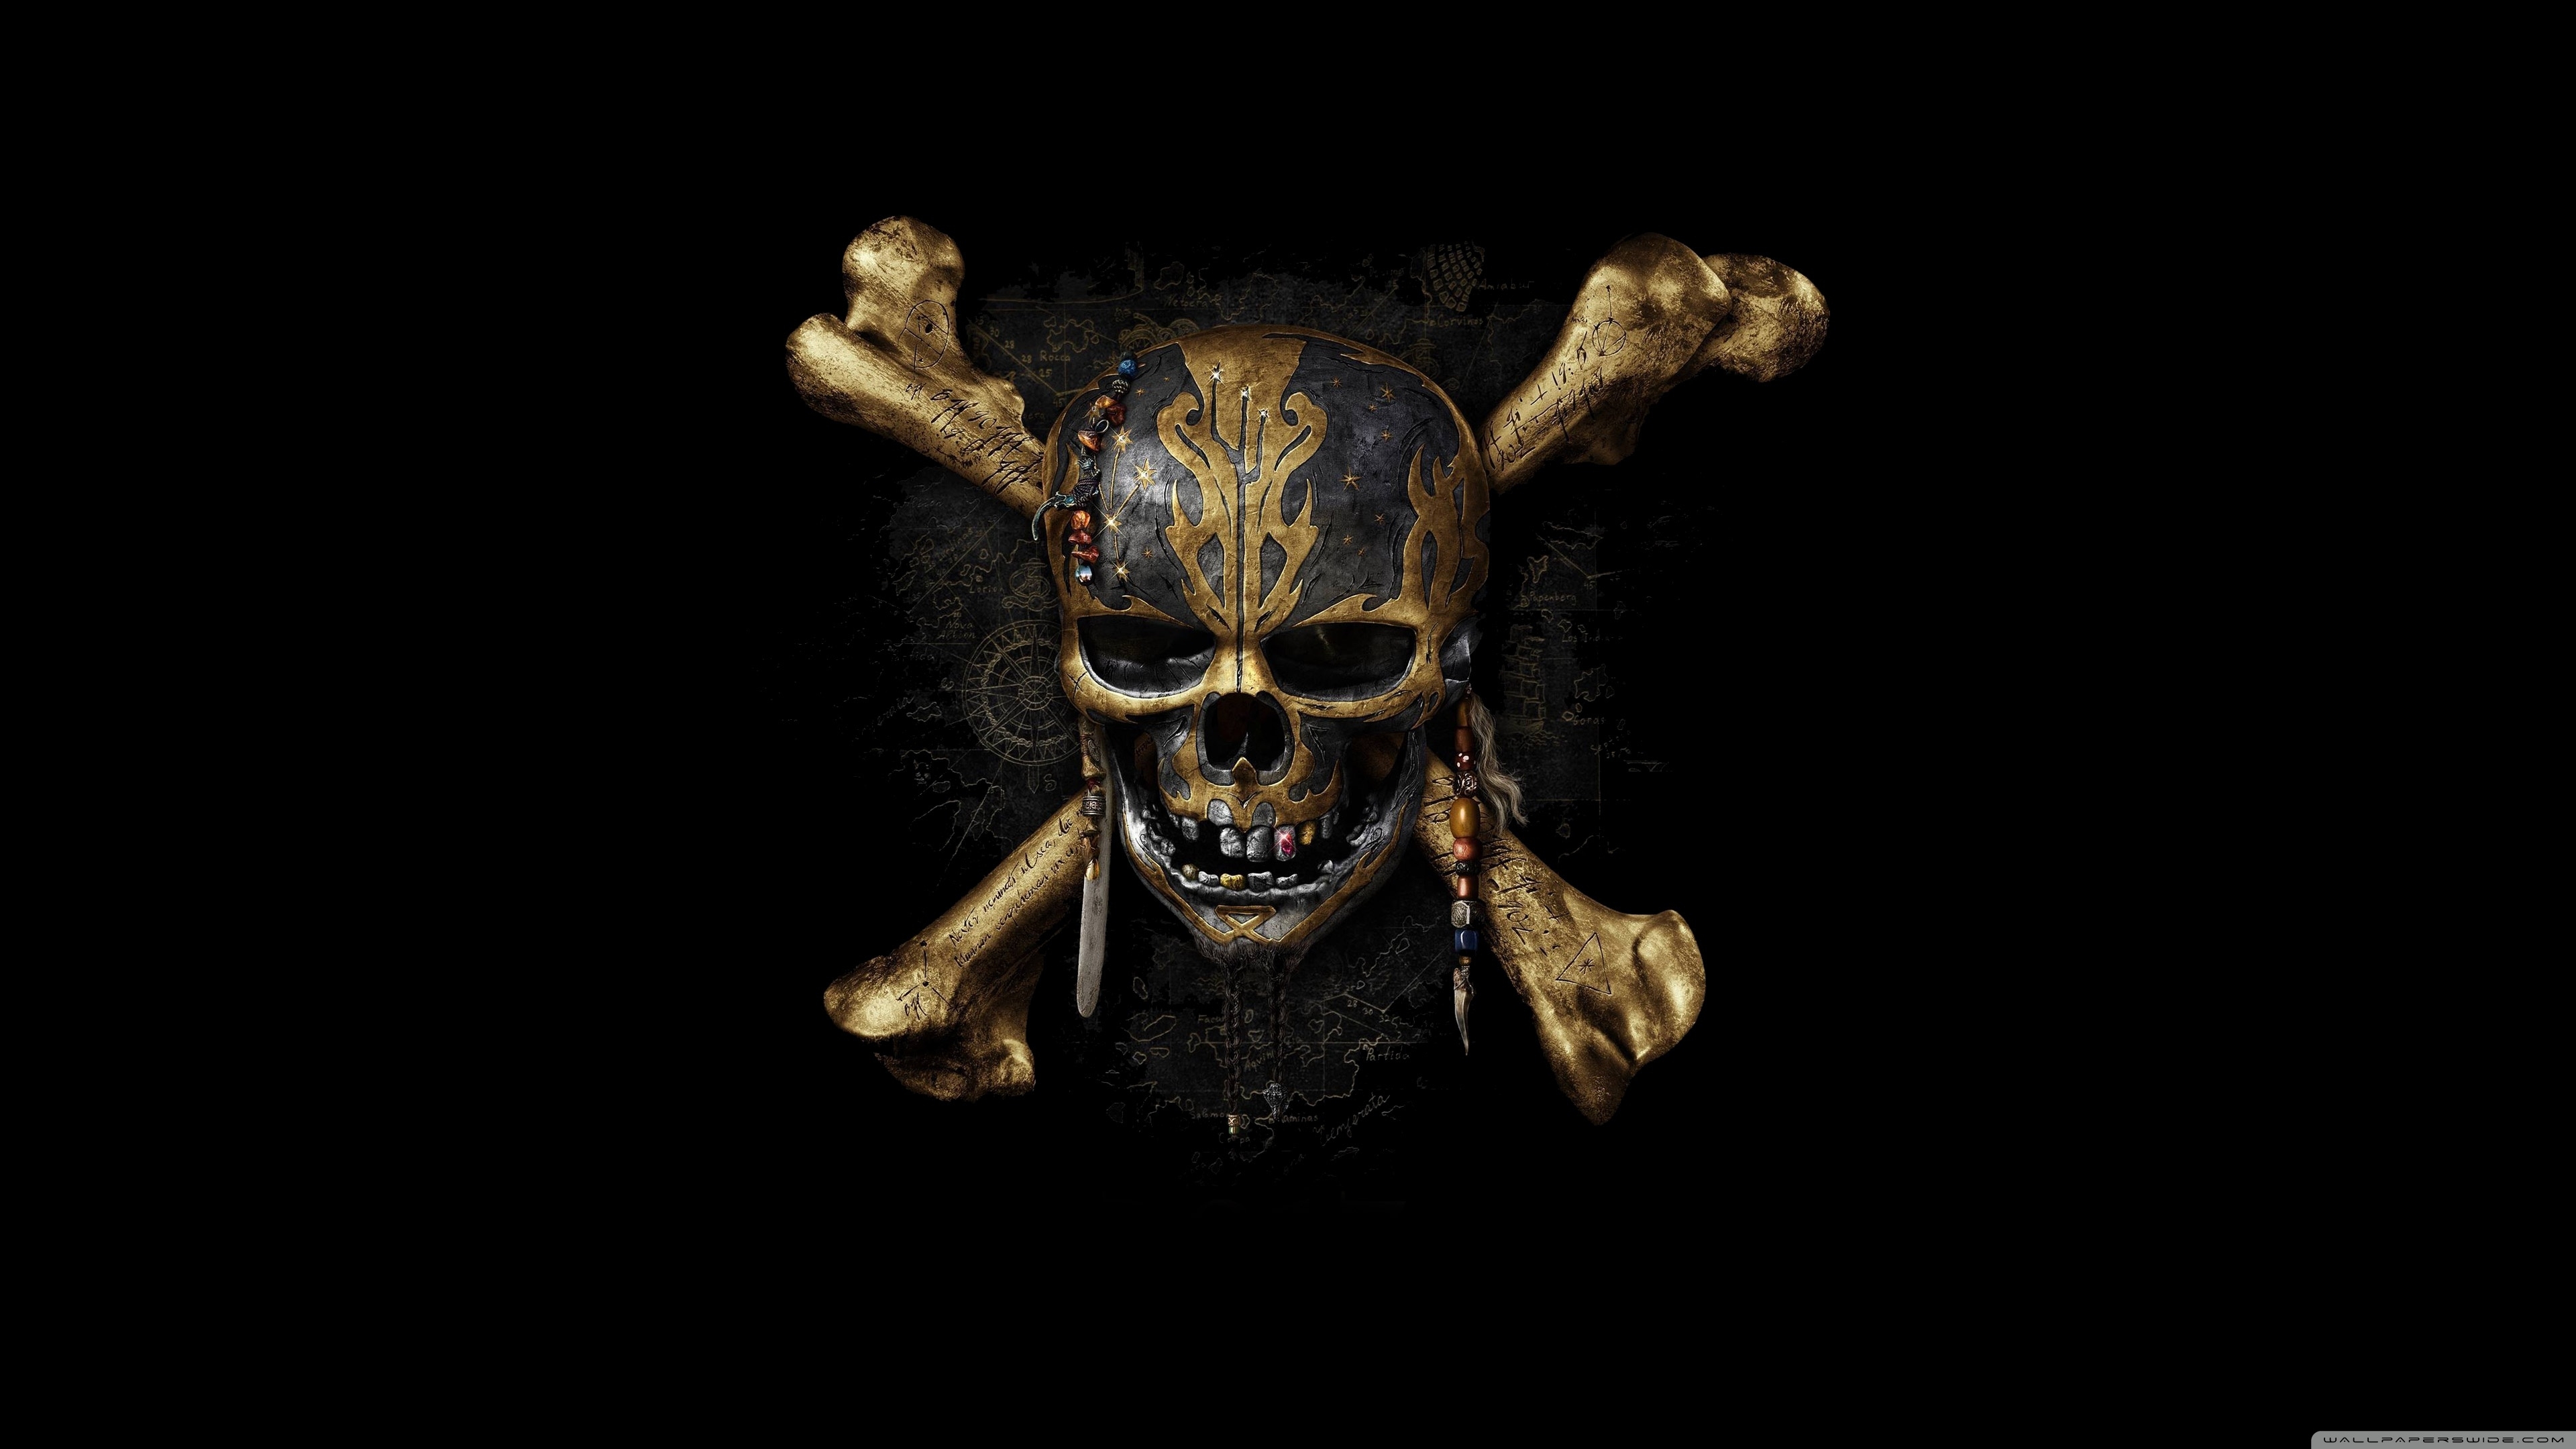 10 Most Popular Pirates Of The Caribbean Wallpapers FULL HD 1920×1080 For PC Background